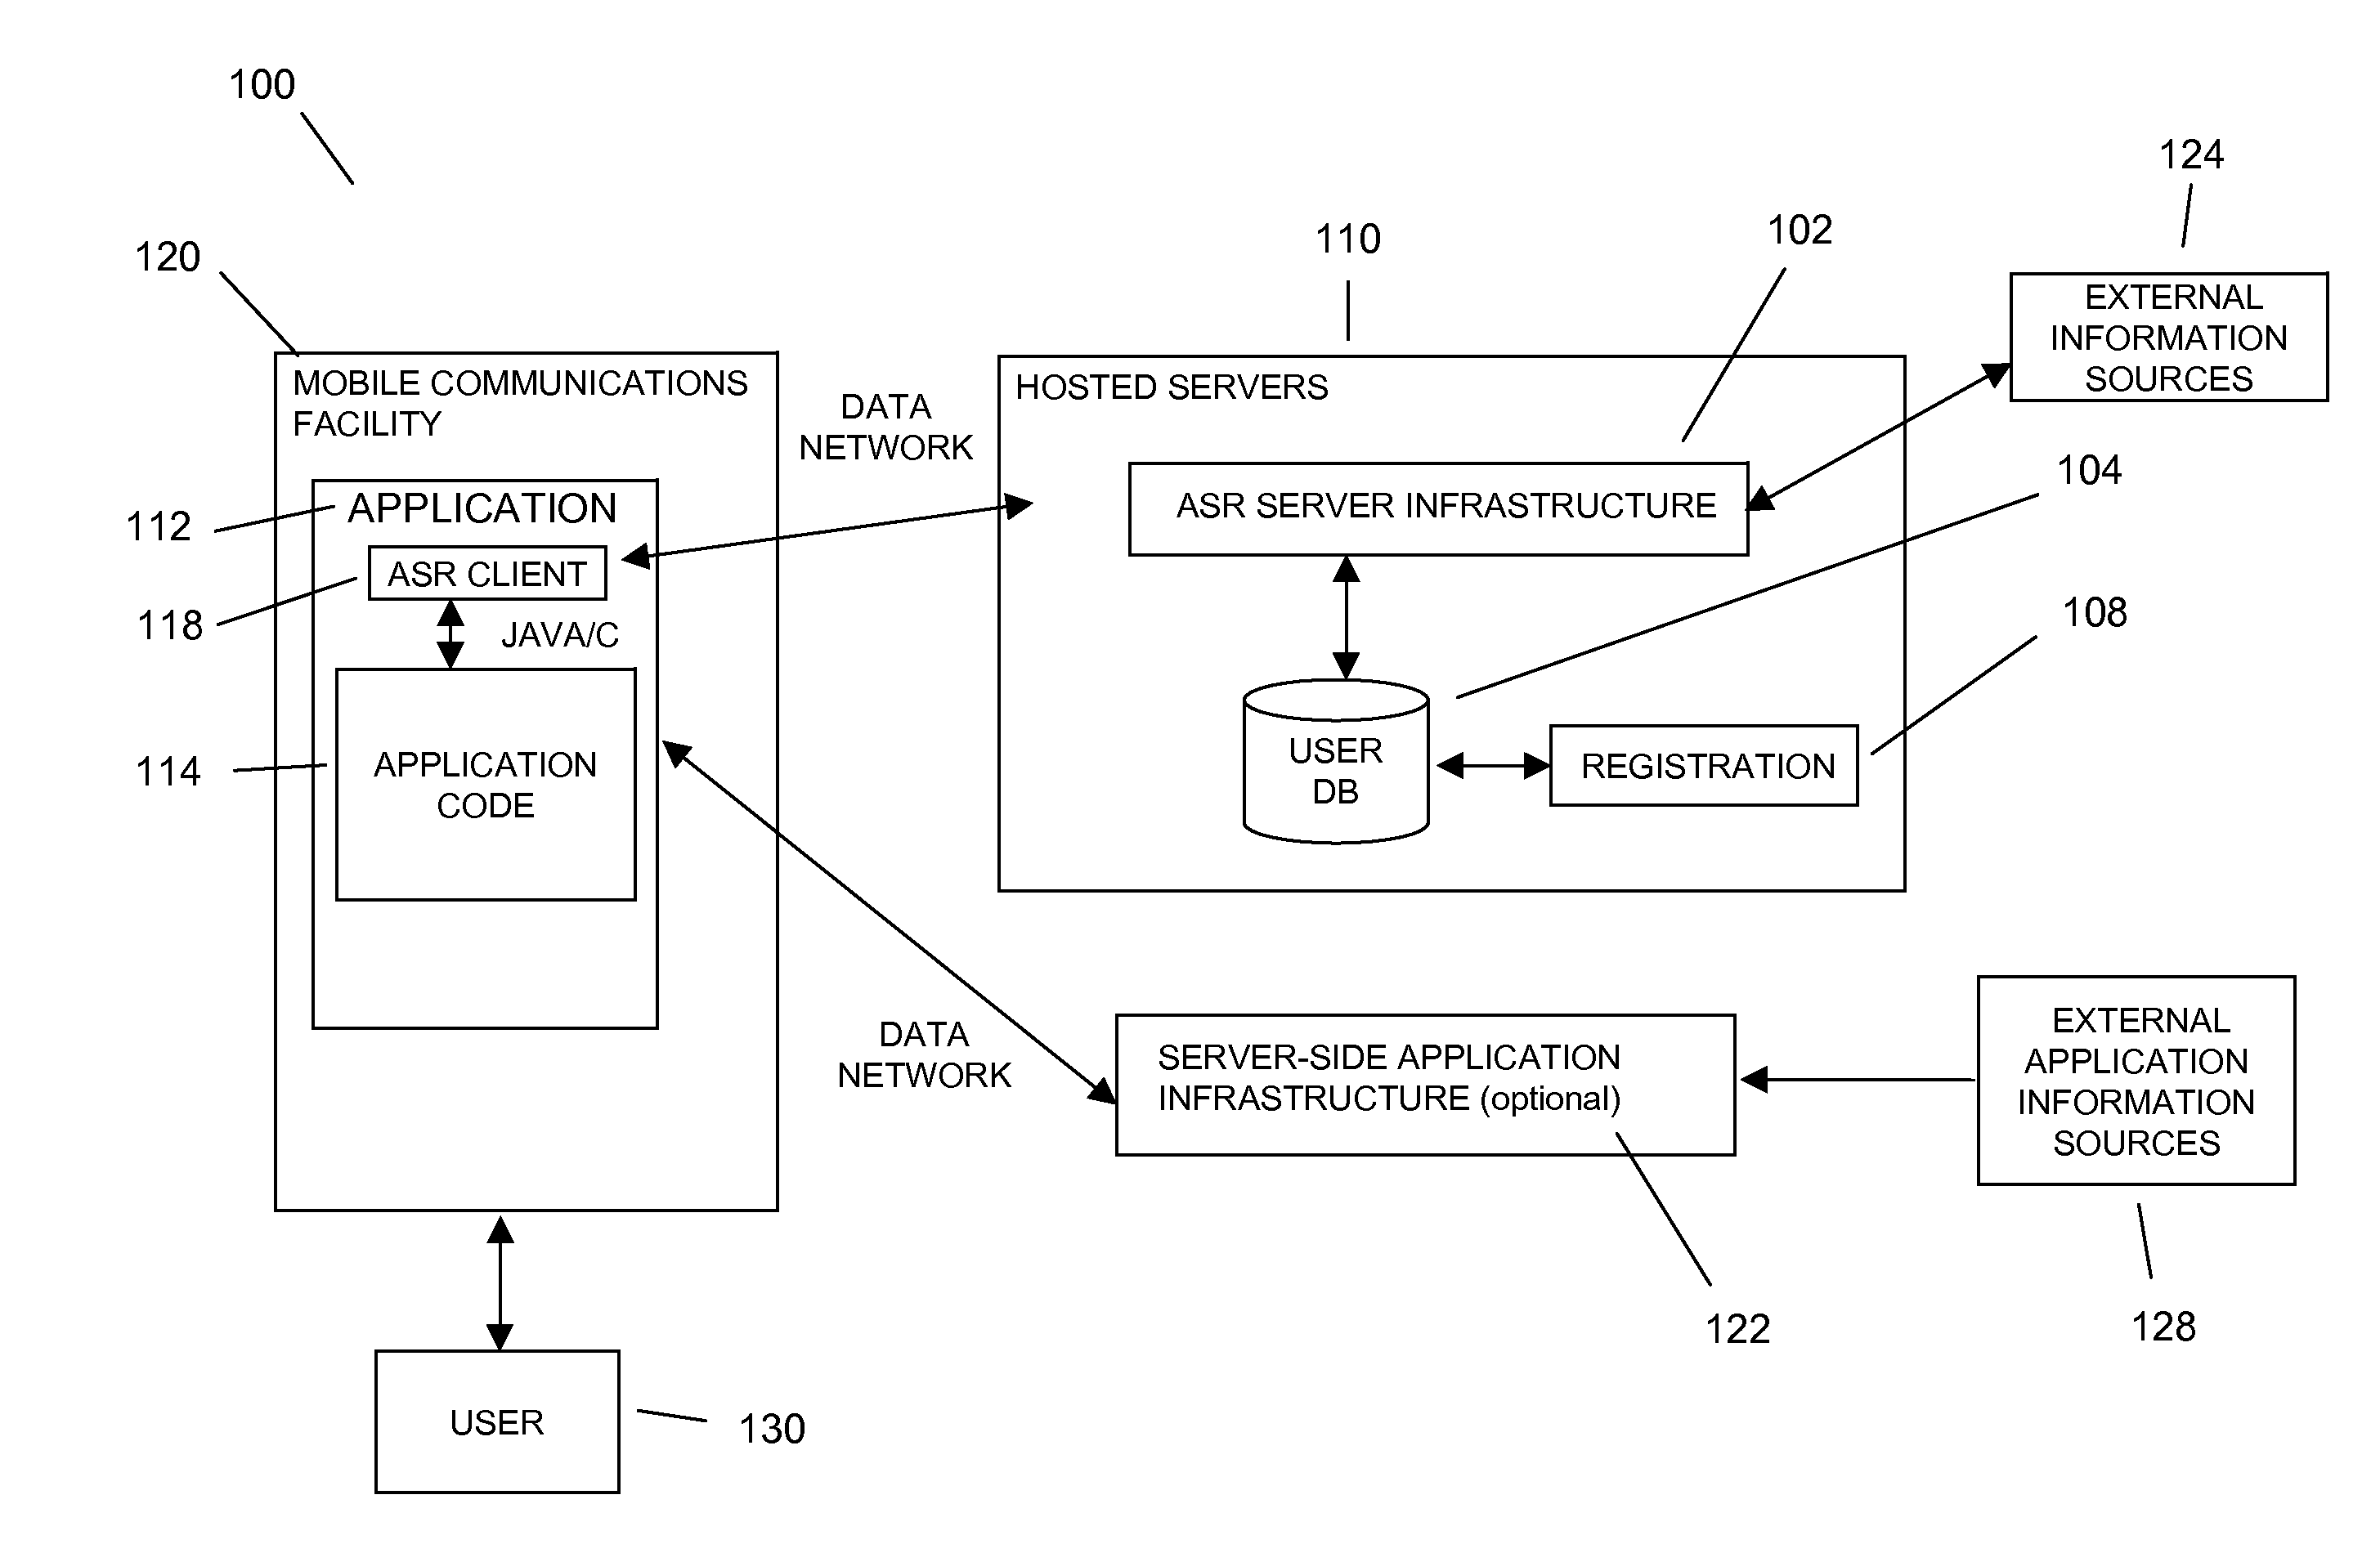 Sending a communications header with voice recording to send metadata for use in speech recognition, formatting, and search in mobile search application